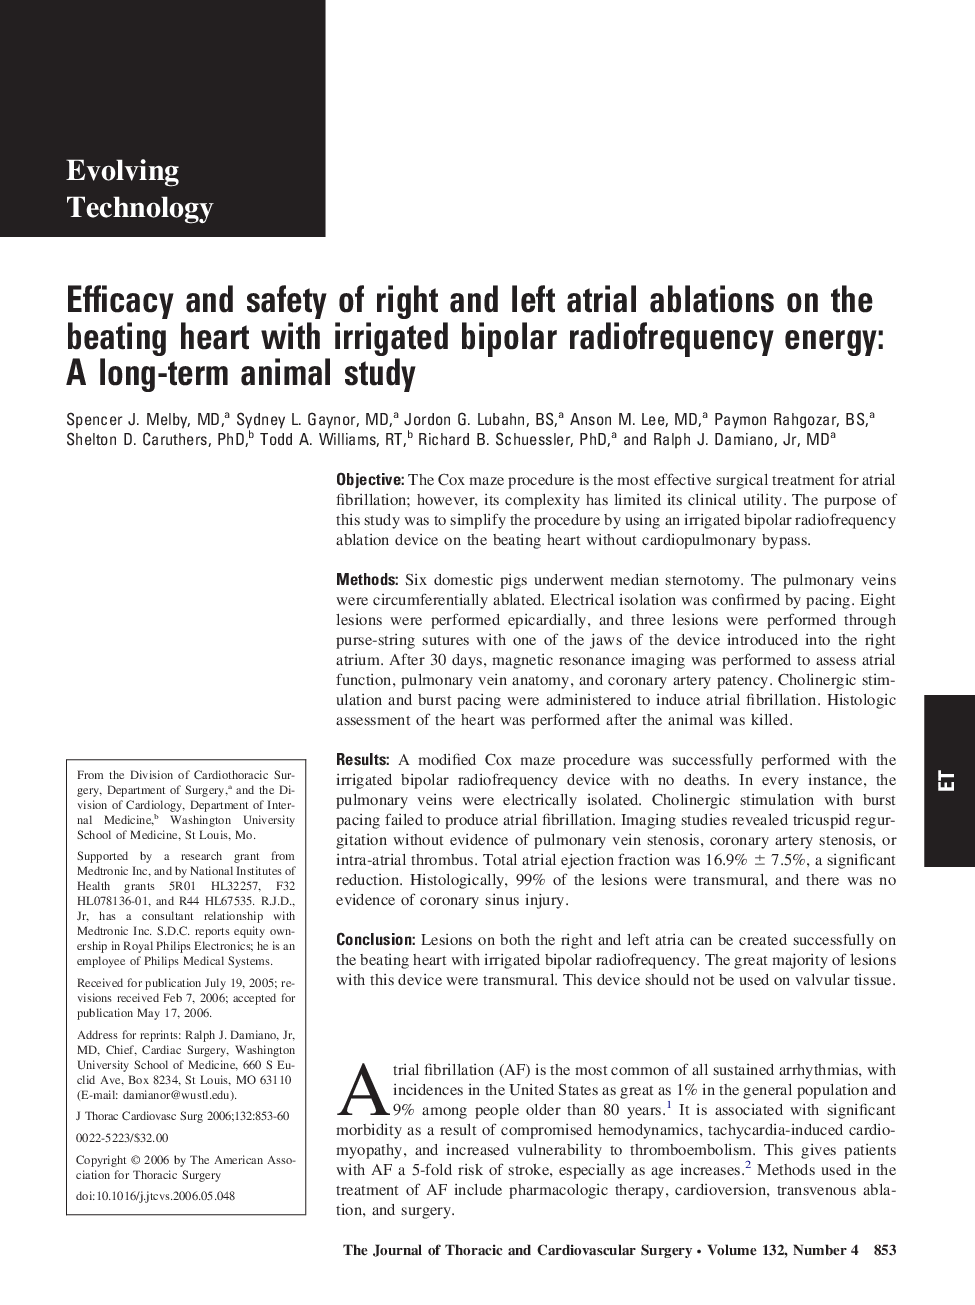 Efficacy and safety of right and left atrial ablations on the beating heart with irrigated bipolar radiofrequency energy: A long-term animal study 